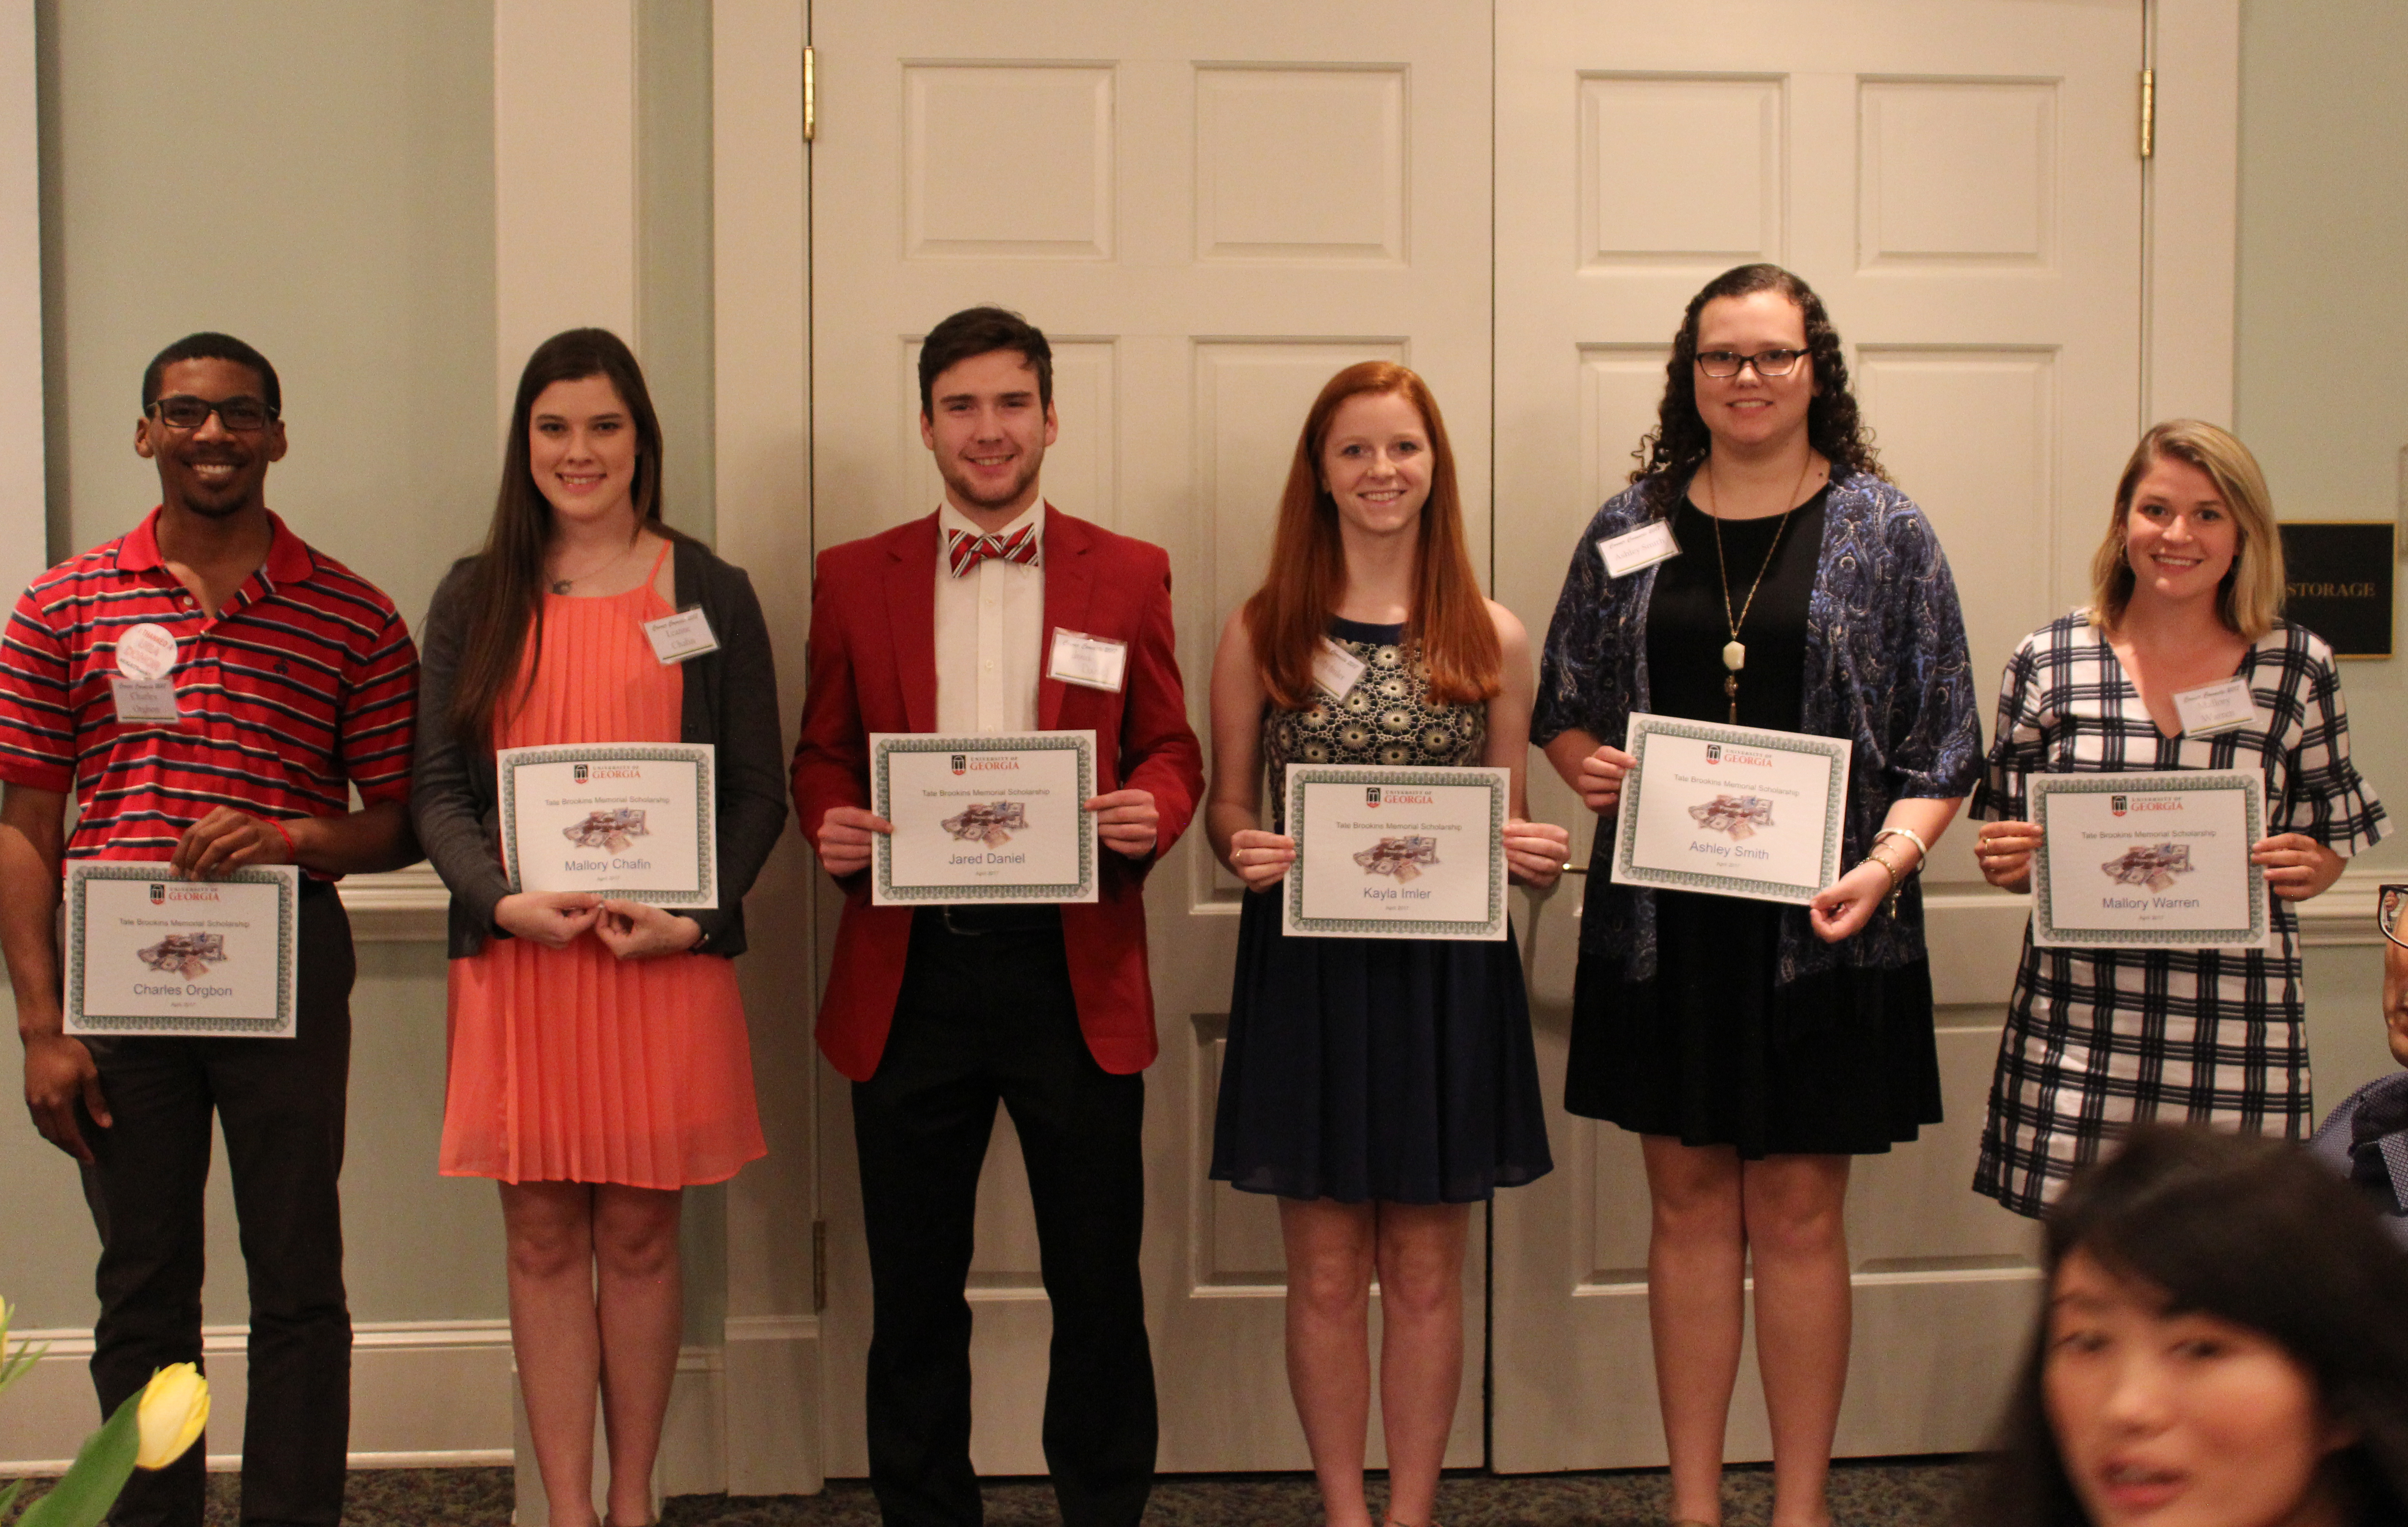 The Department of Agricultural and Applied Economics awarded 30 scholarships for 2017-2018. From left, recipients include Charles Orgbon, Mallory Chafin, Jared Daniel, Kayla Imler, Ashley Smith and Mallory Warren.